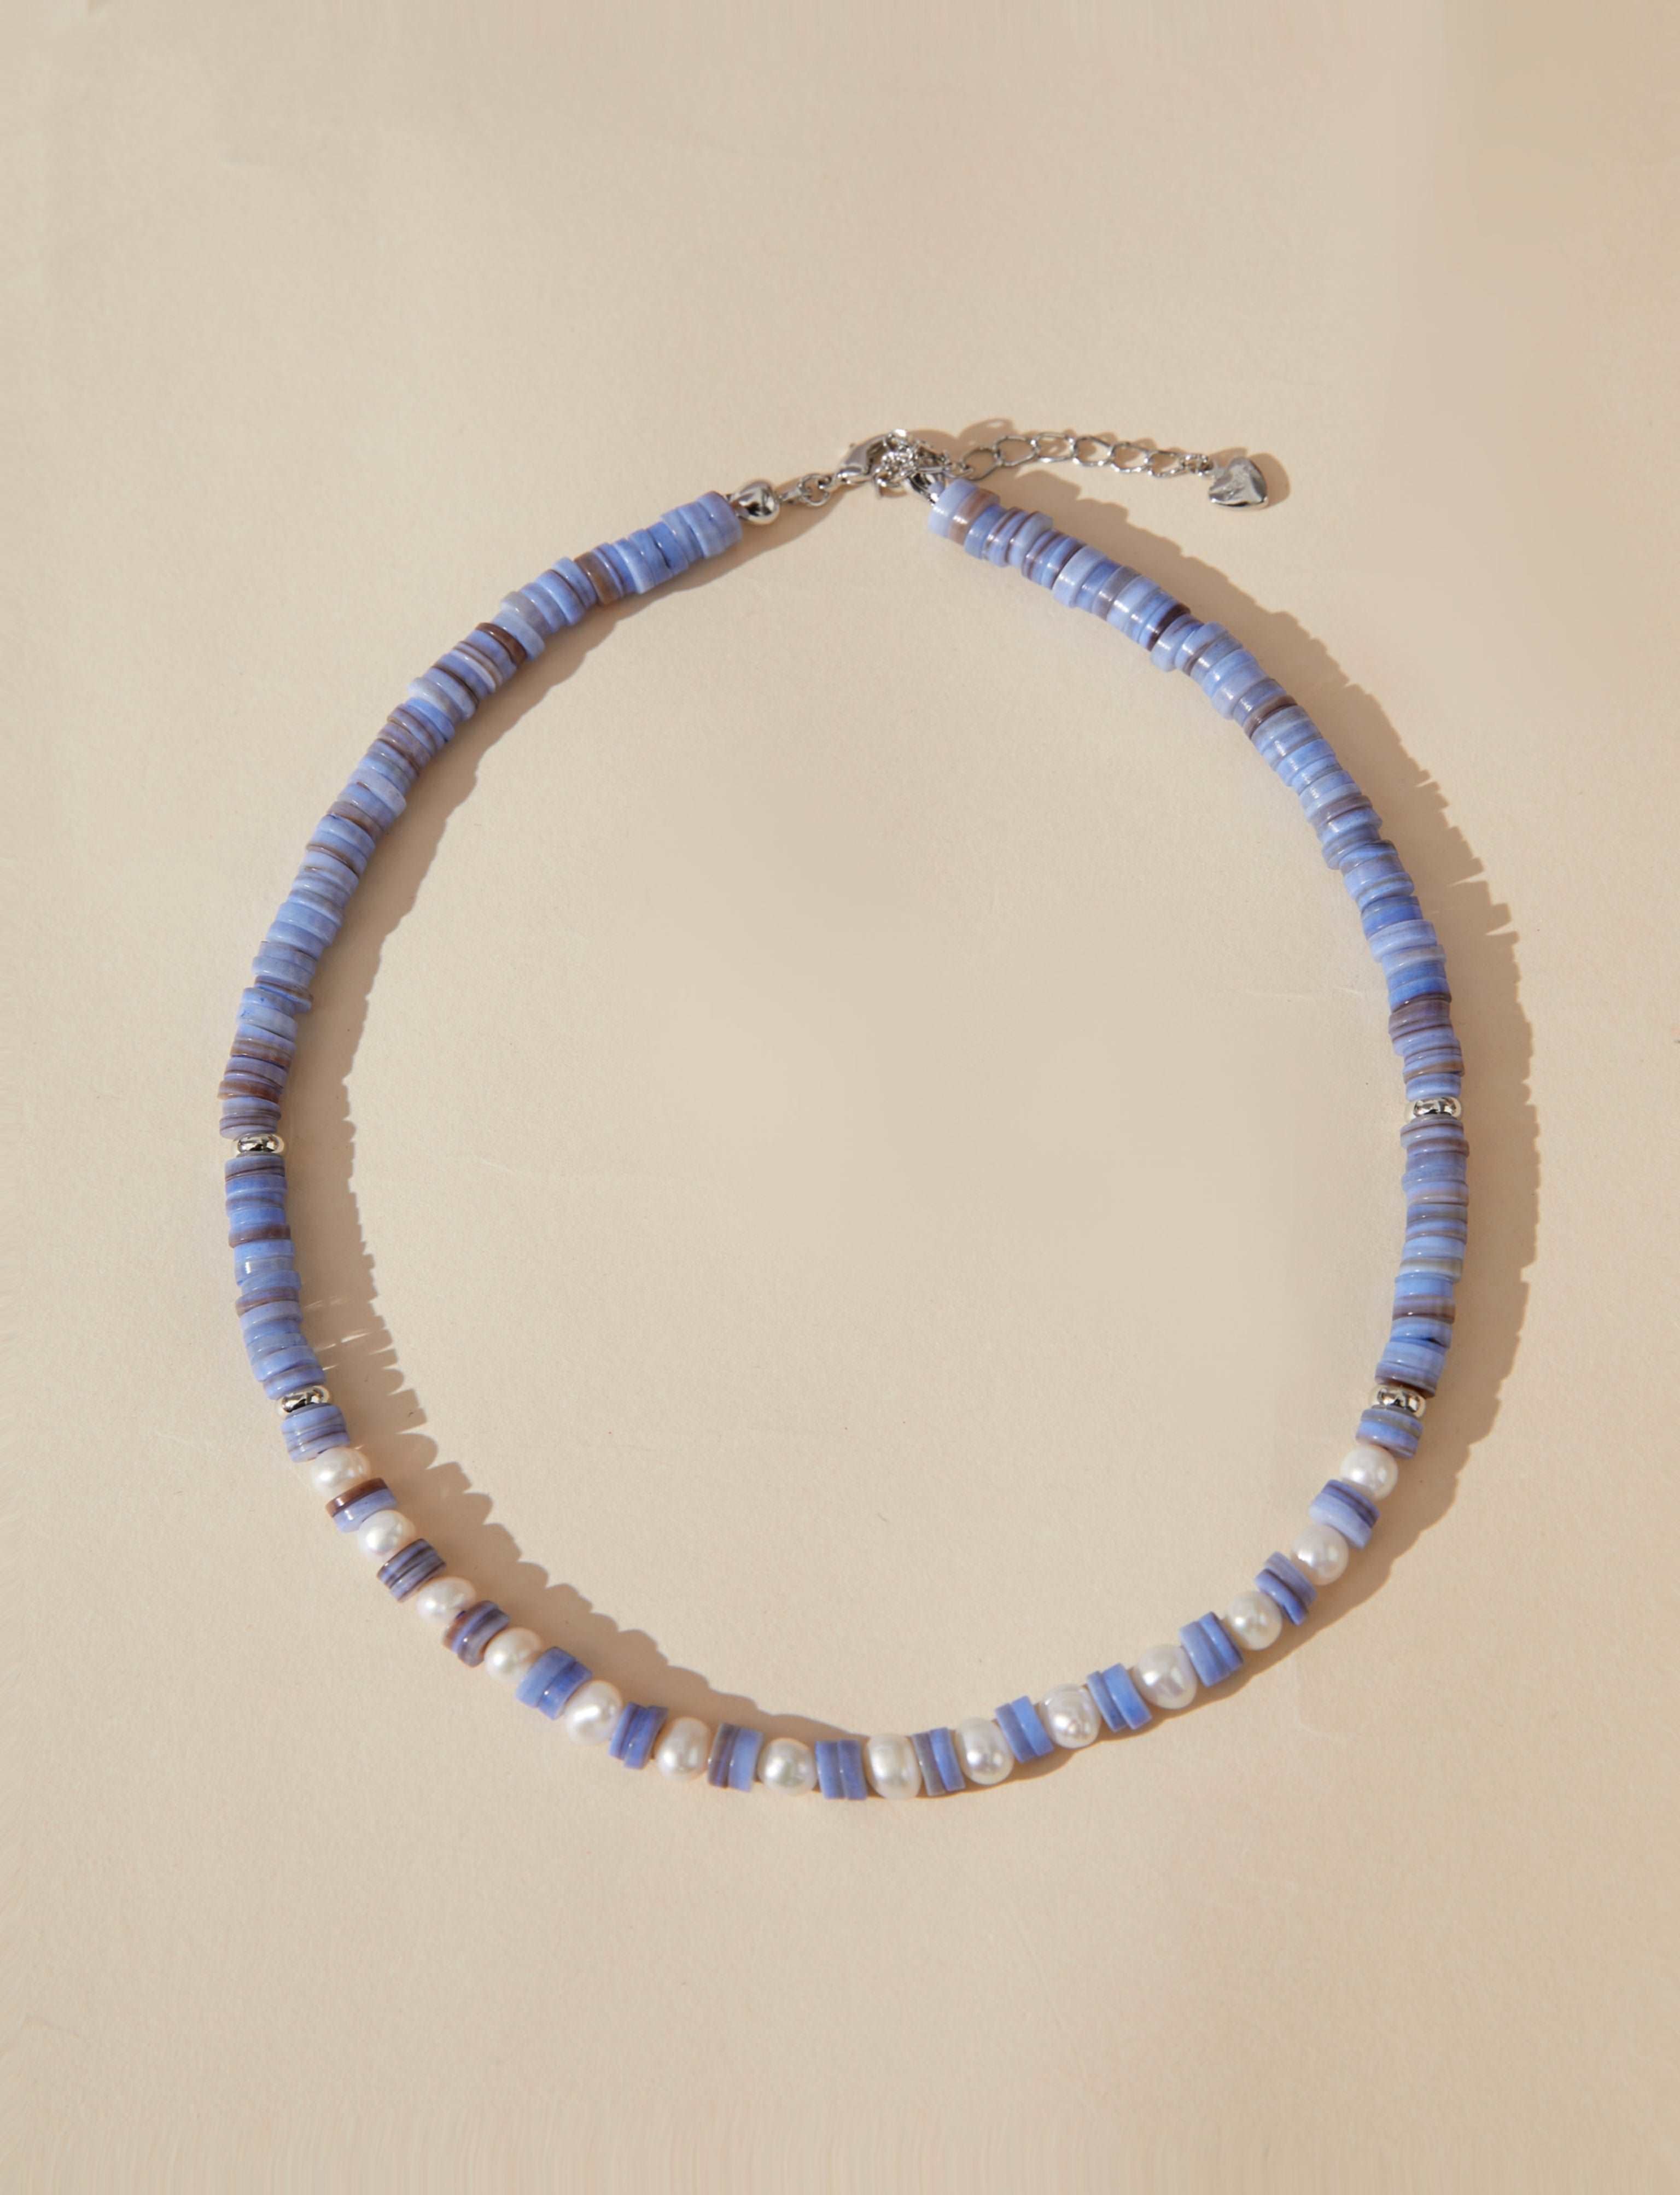 Handmade Mother of Pearl Bead Necklace